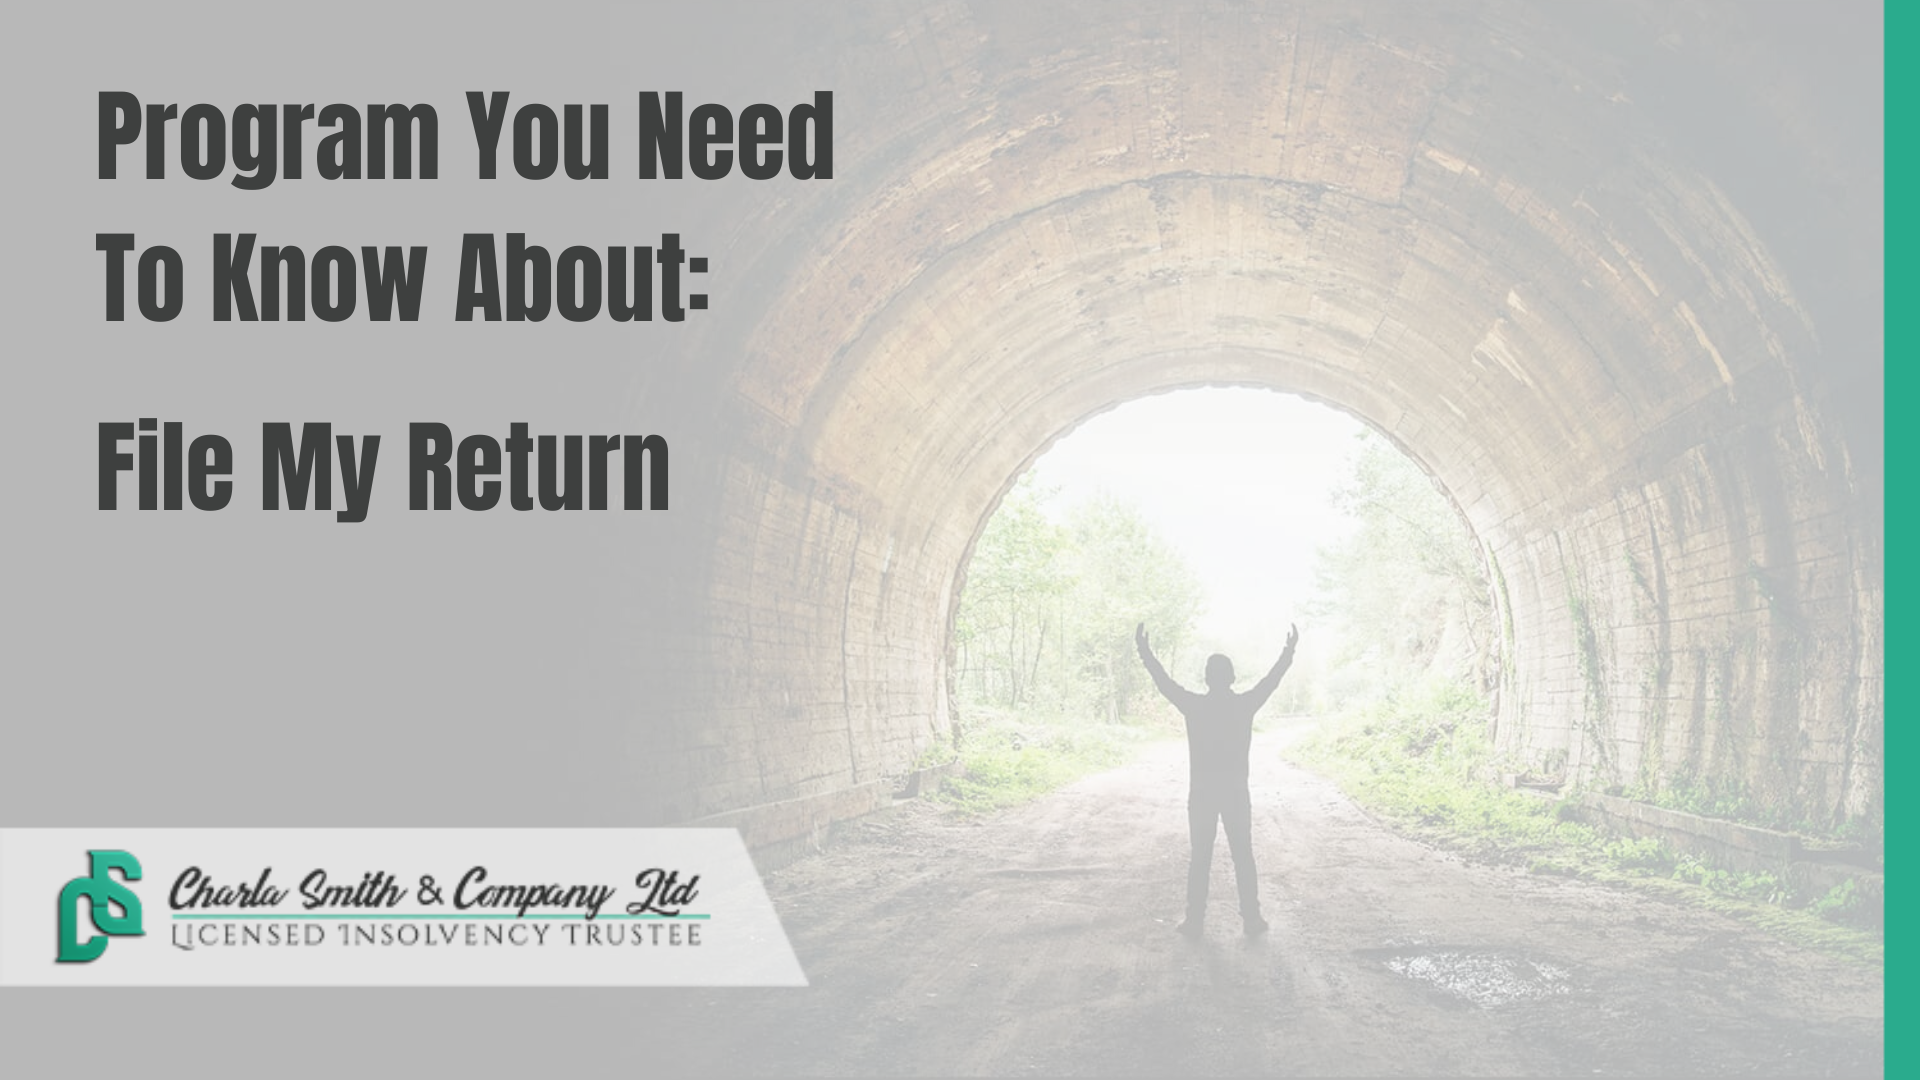 Program you need to know about: File My Return